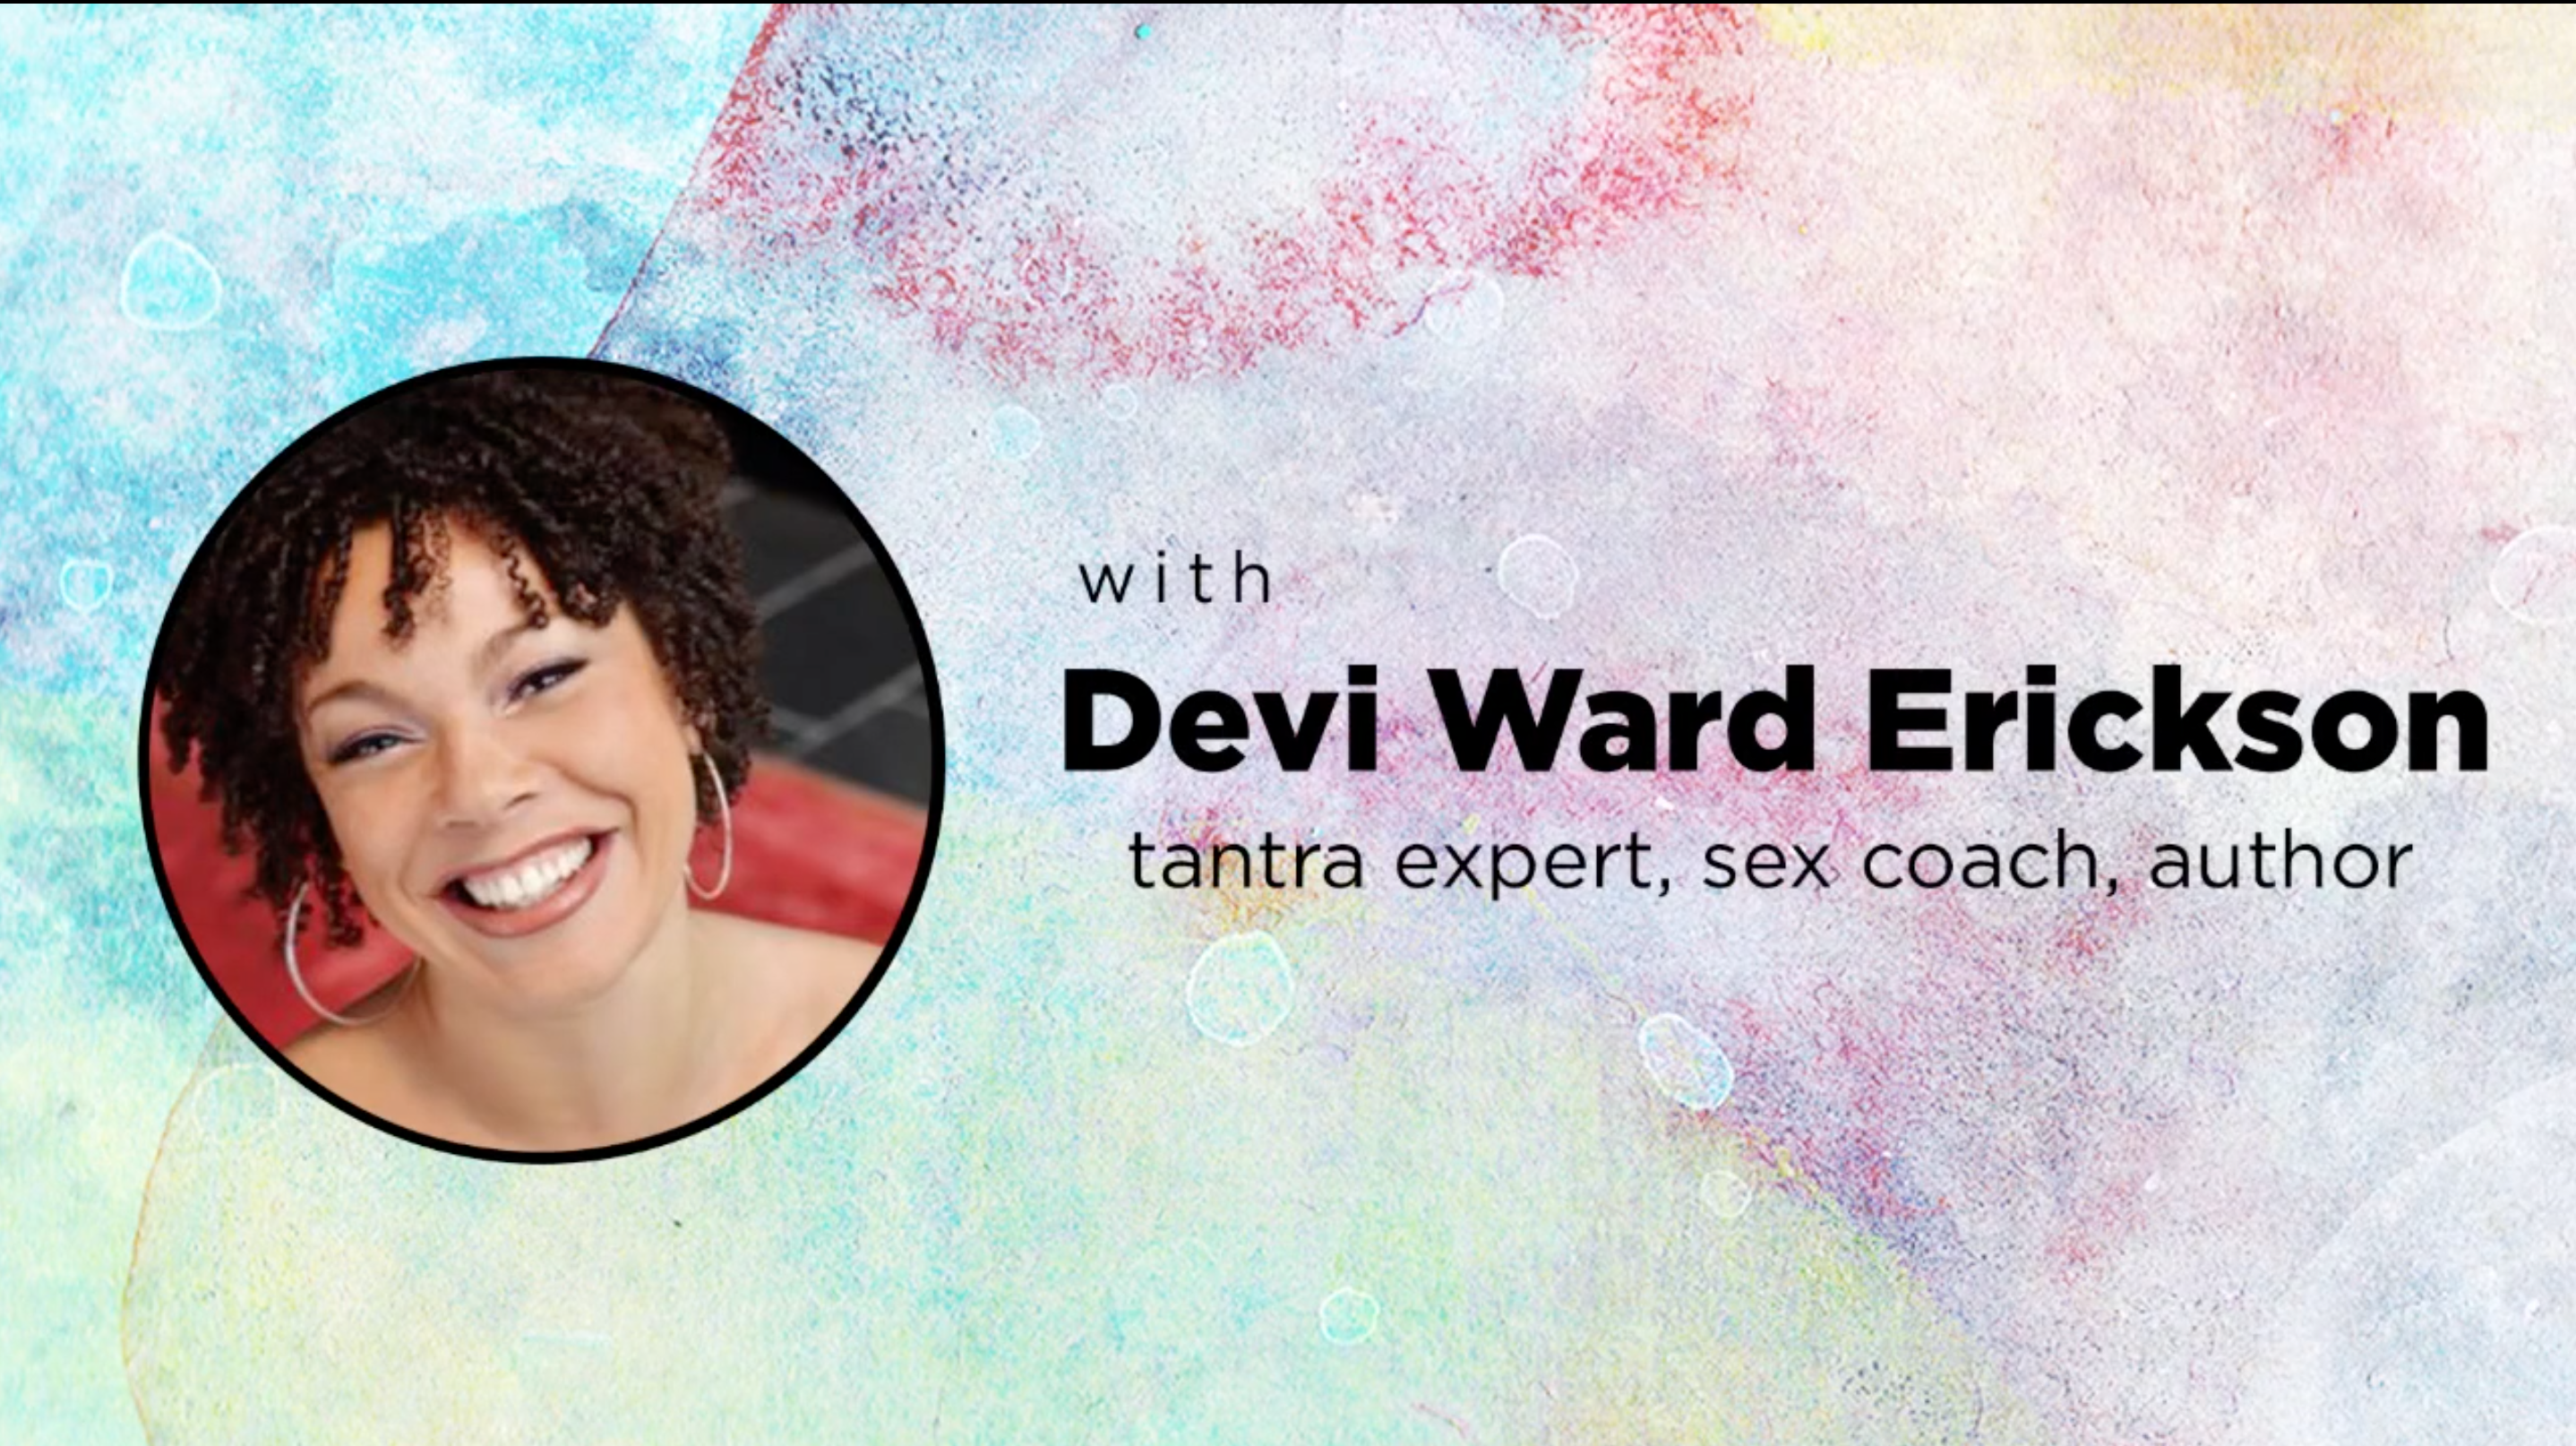 Devi Ward Erickson - Tantra Expert, Sex Coach, Author,  | Moving Conversations Online with Kriste Peoples